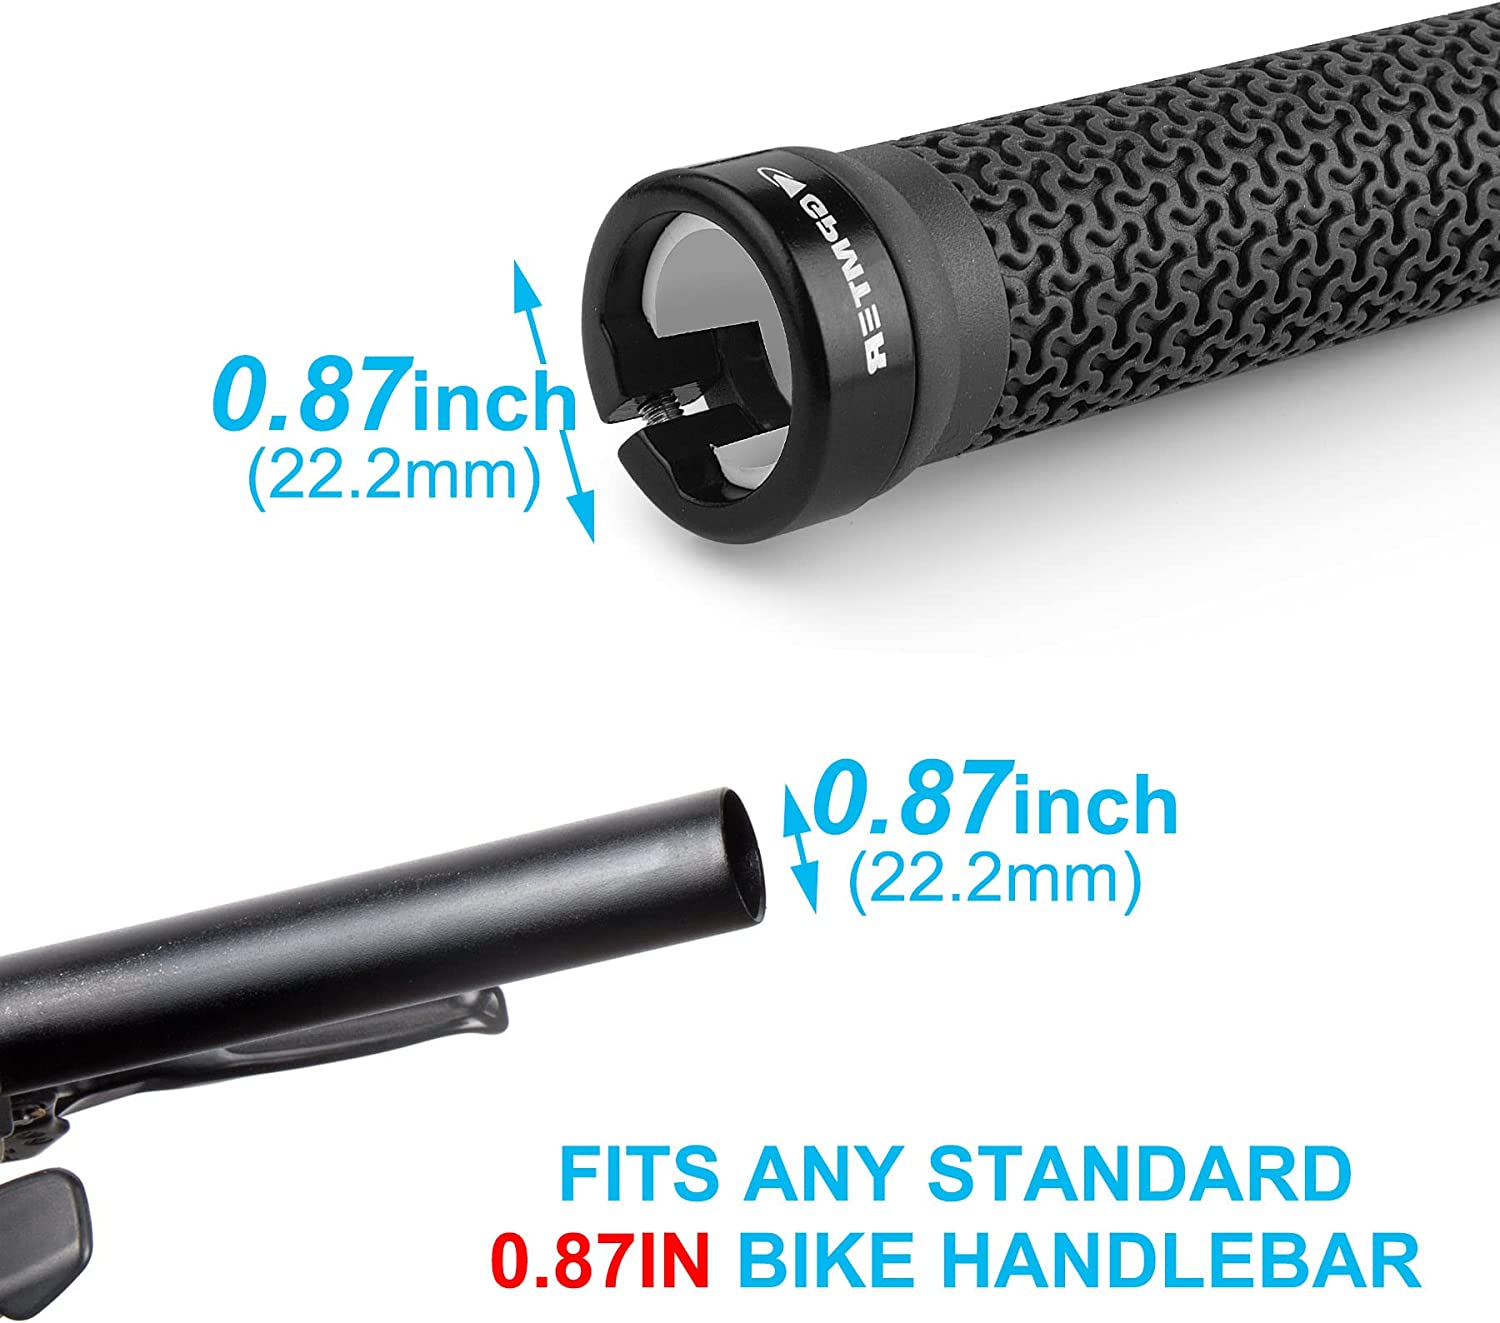 GPMTER-Bike-Grips-size-Voltaire Cycles Verona